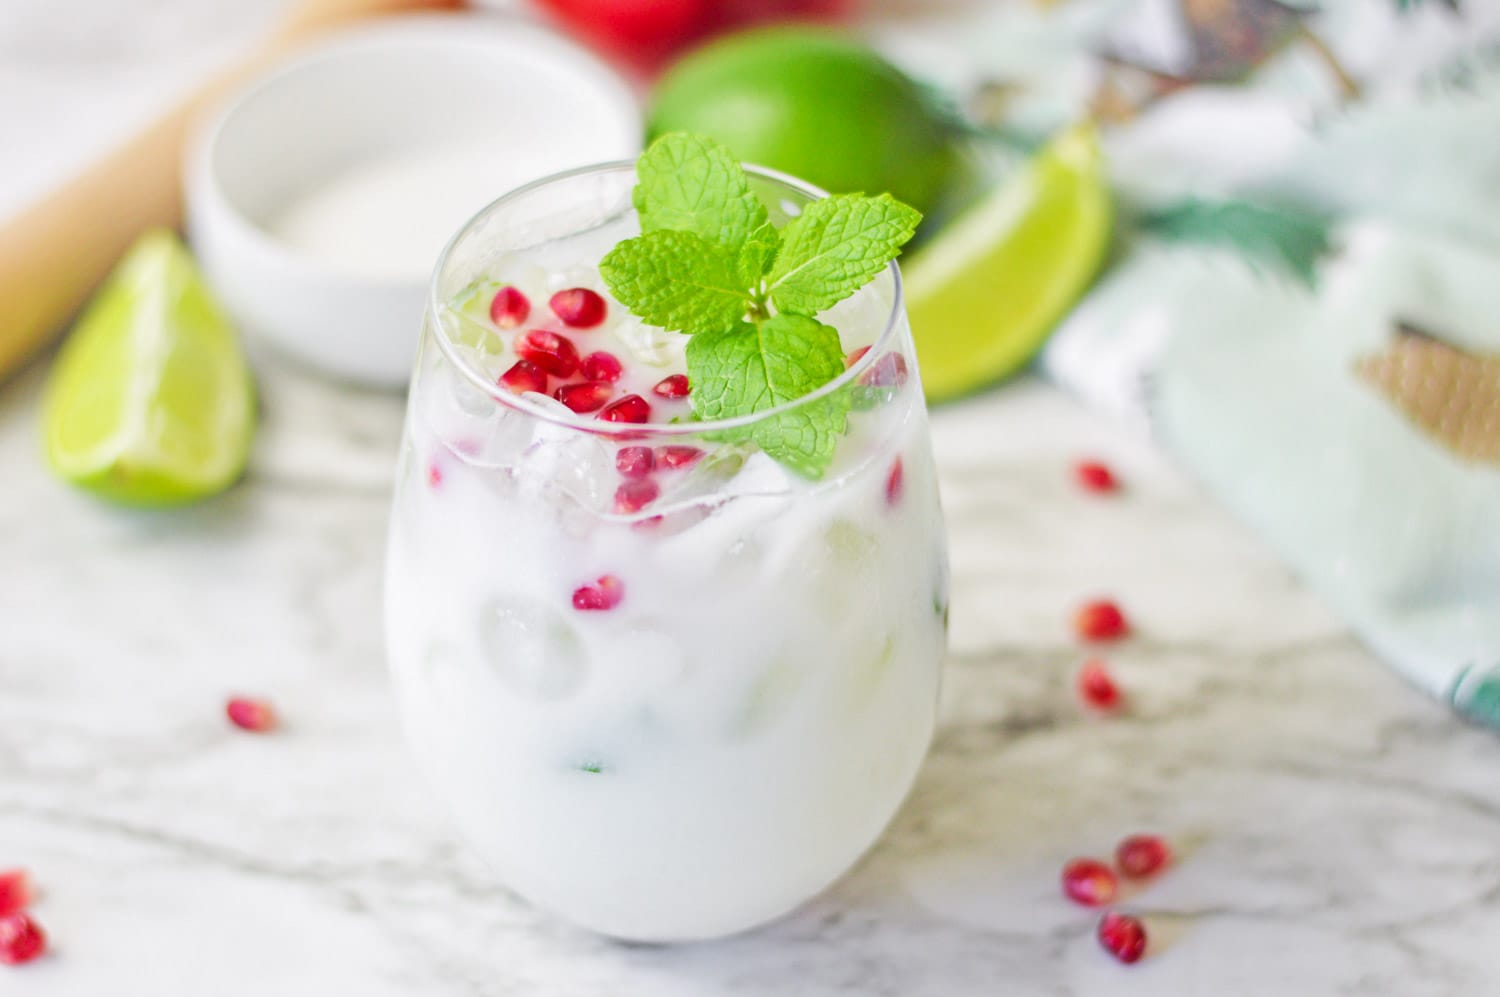 White christmas mojito garnished with pomegranate arils and fresh mint leaves